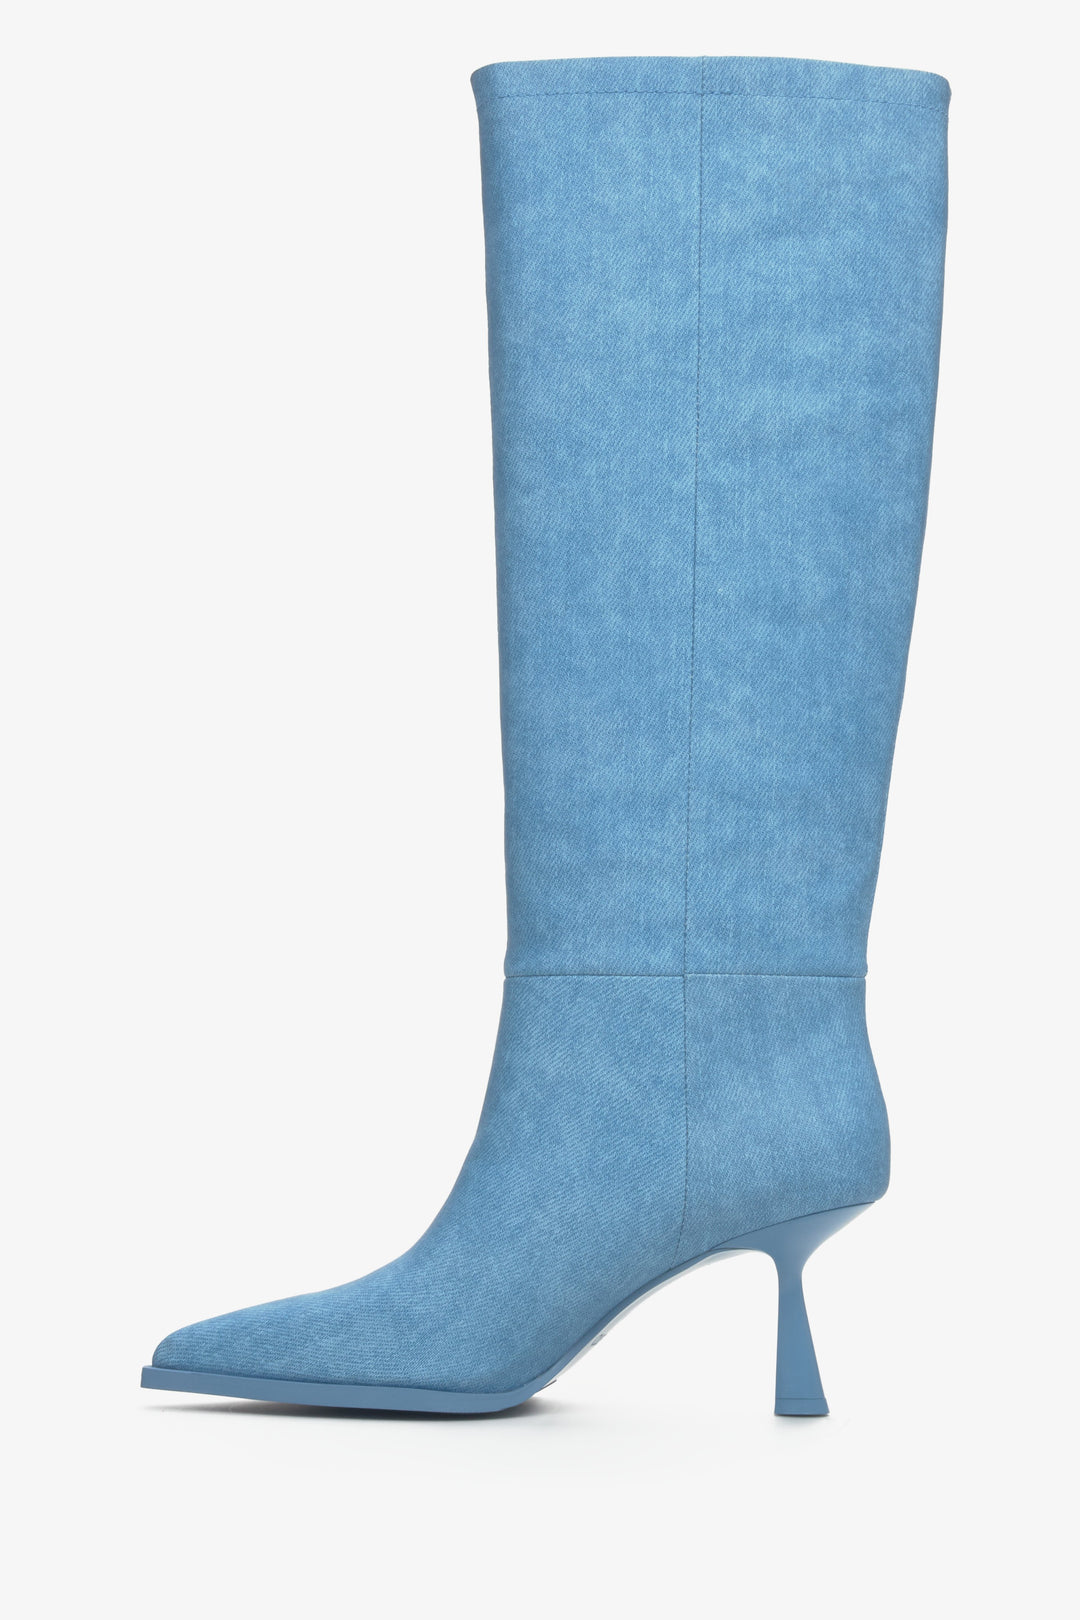 Blue high-heel women's boots with a cone heel by Estro - shoe profile.